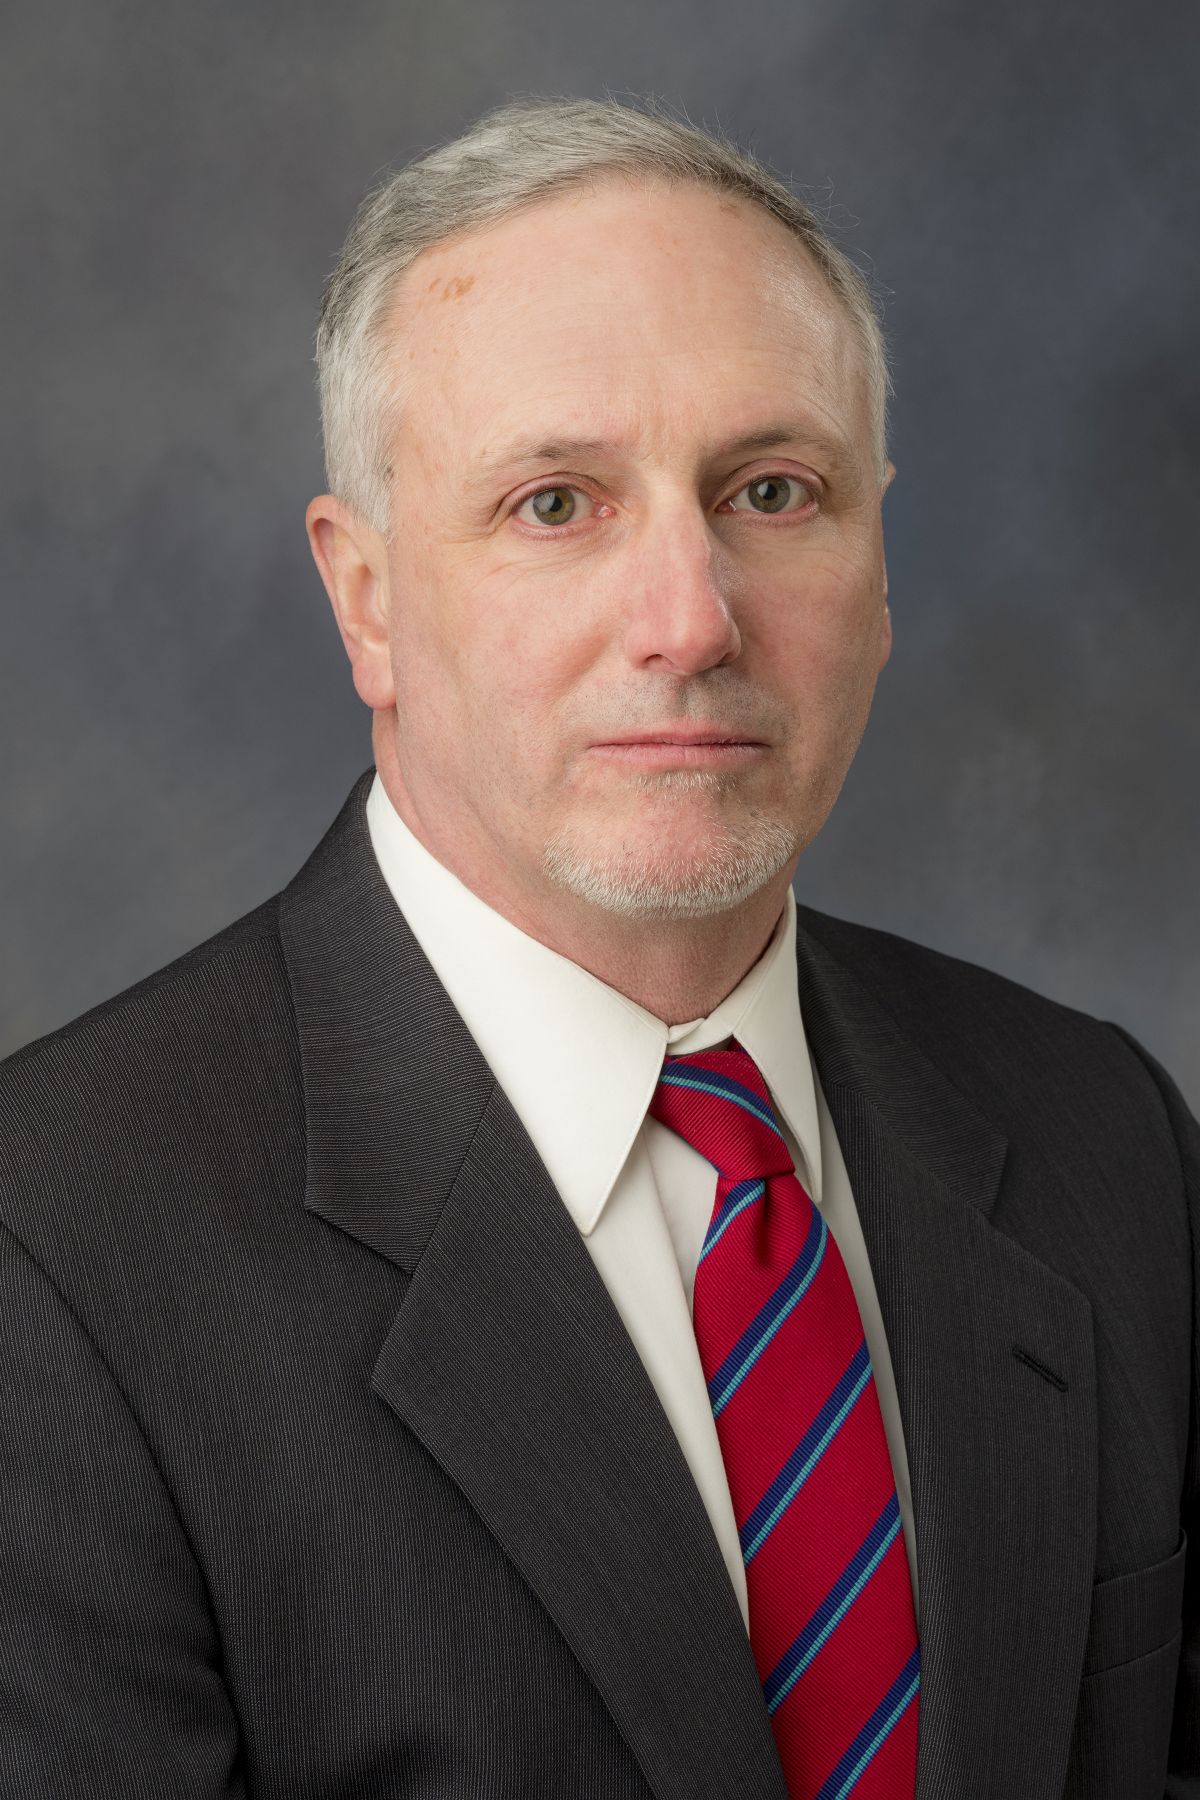 William R. Armstrong, CFA, is a Senior Equity Research Analyst at John G. Ullman & Associates, Inc.